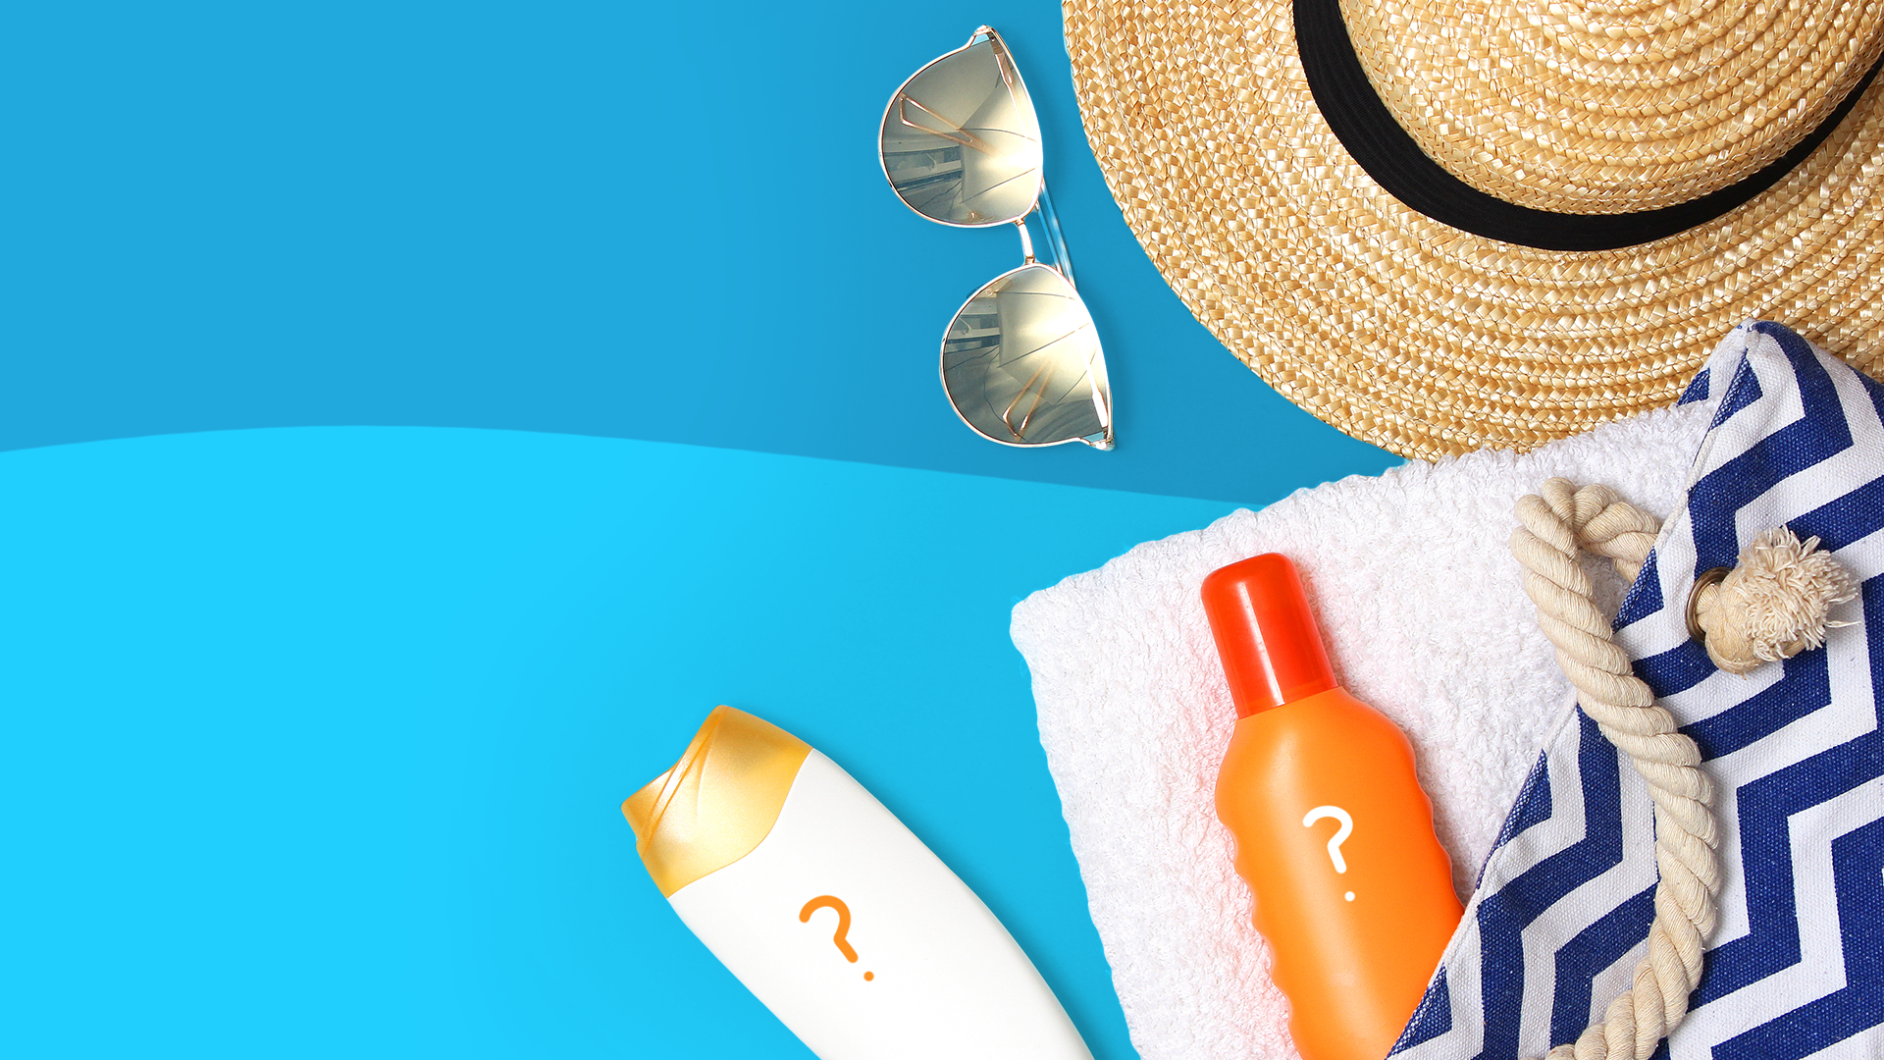 Does sunscreen expire? Bottles of sunscreen and beach supplies